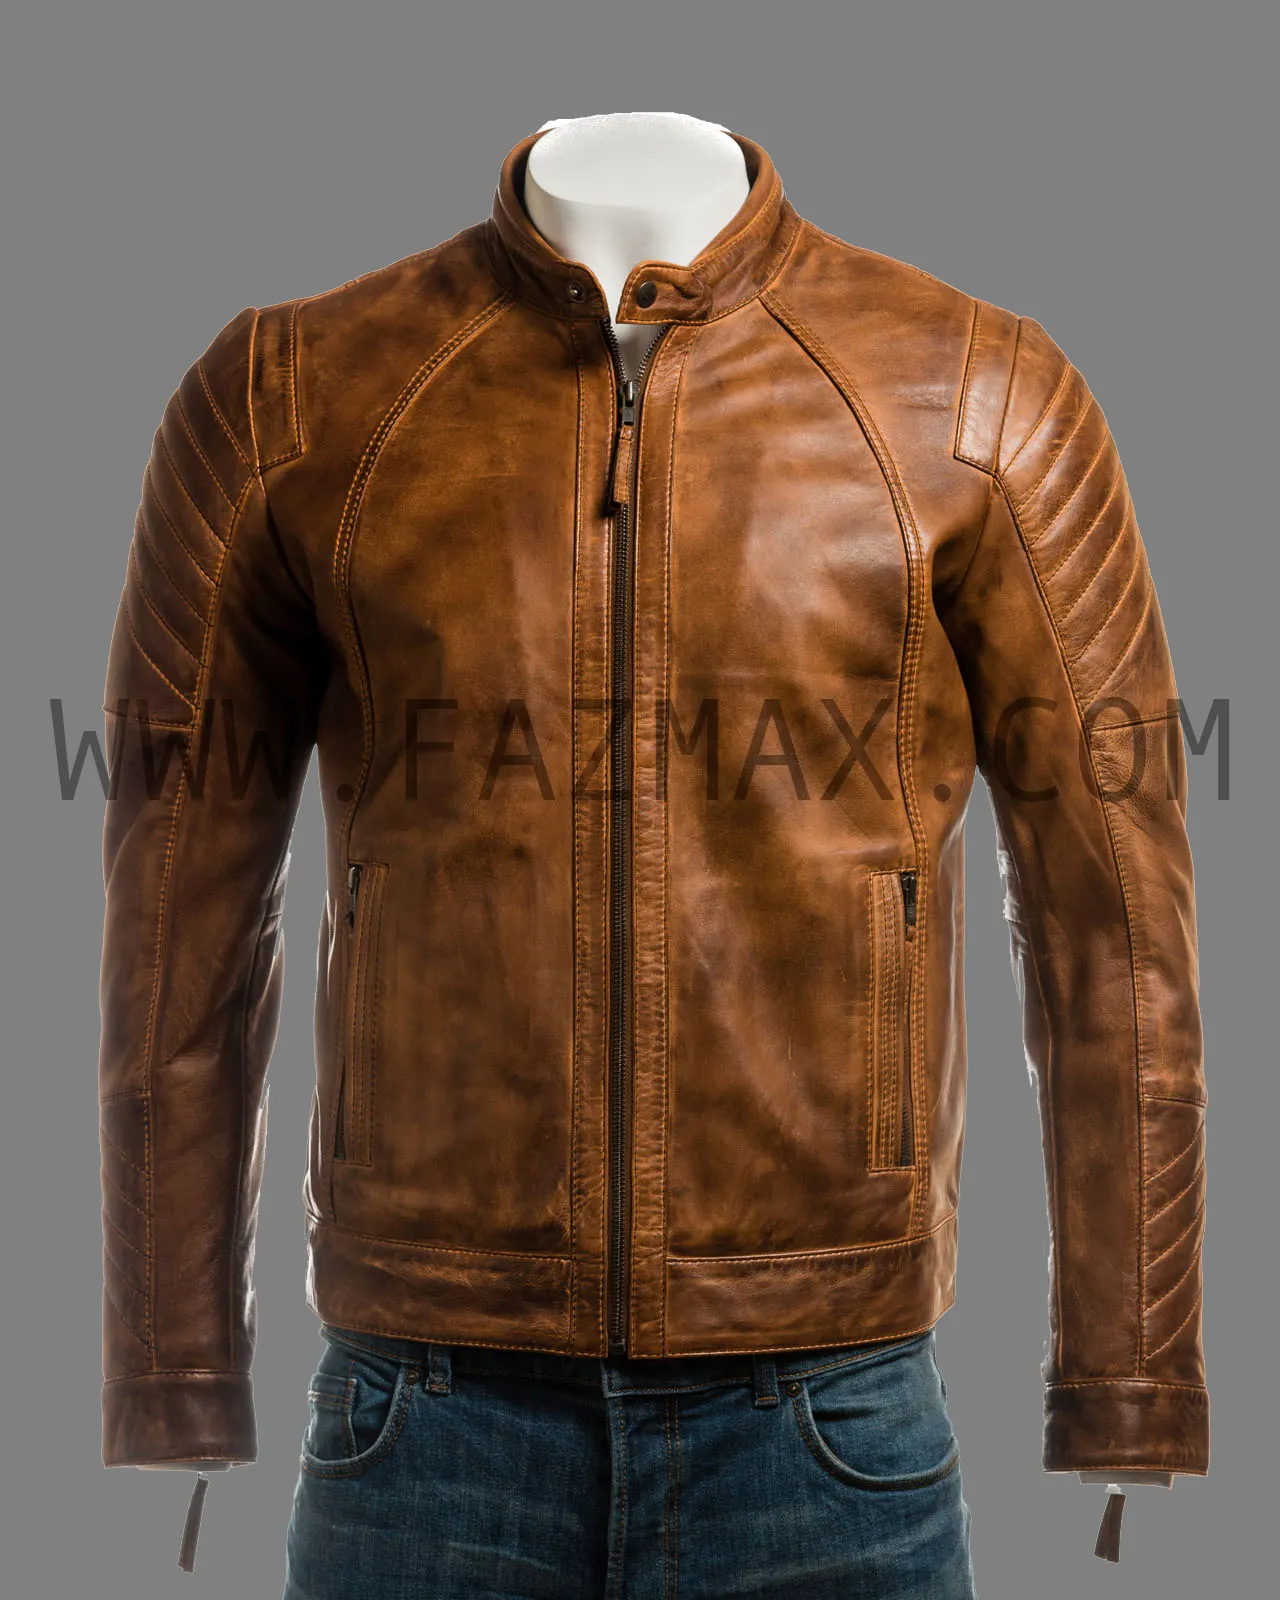 Mens Timber Diamond Shoulder Biker Style Leather Jacket waxed